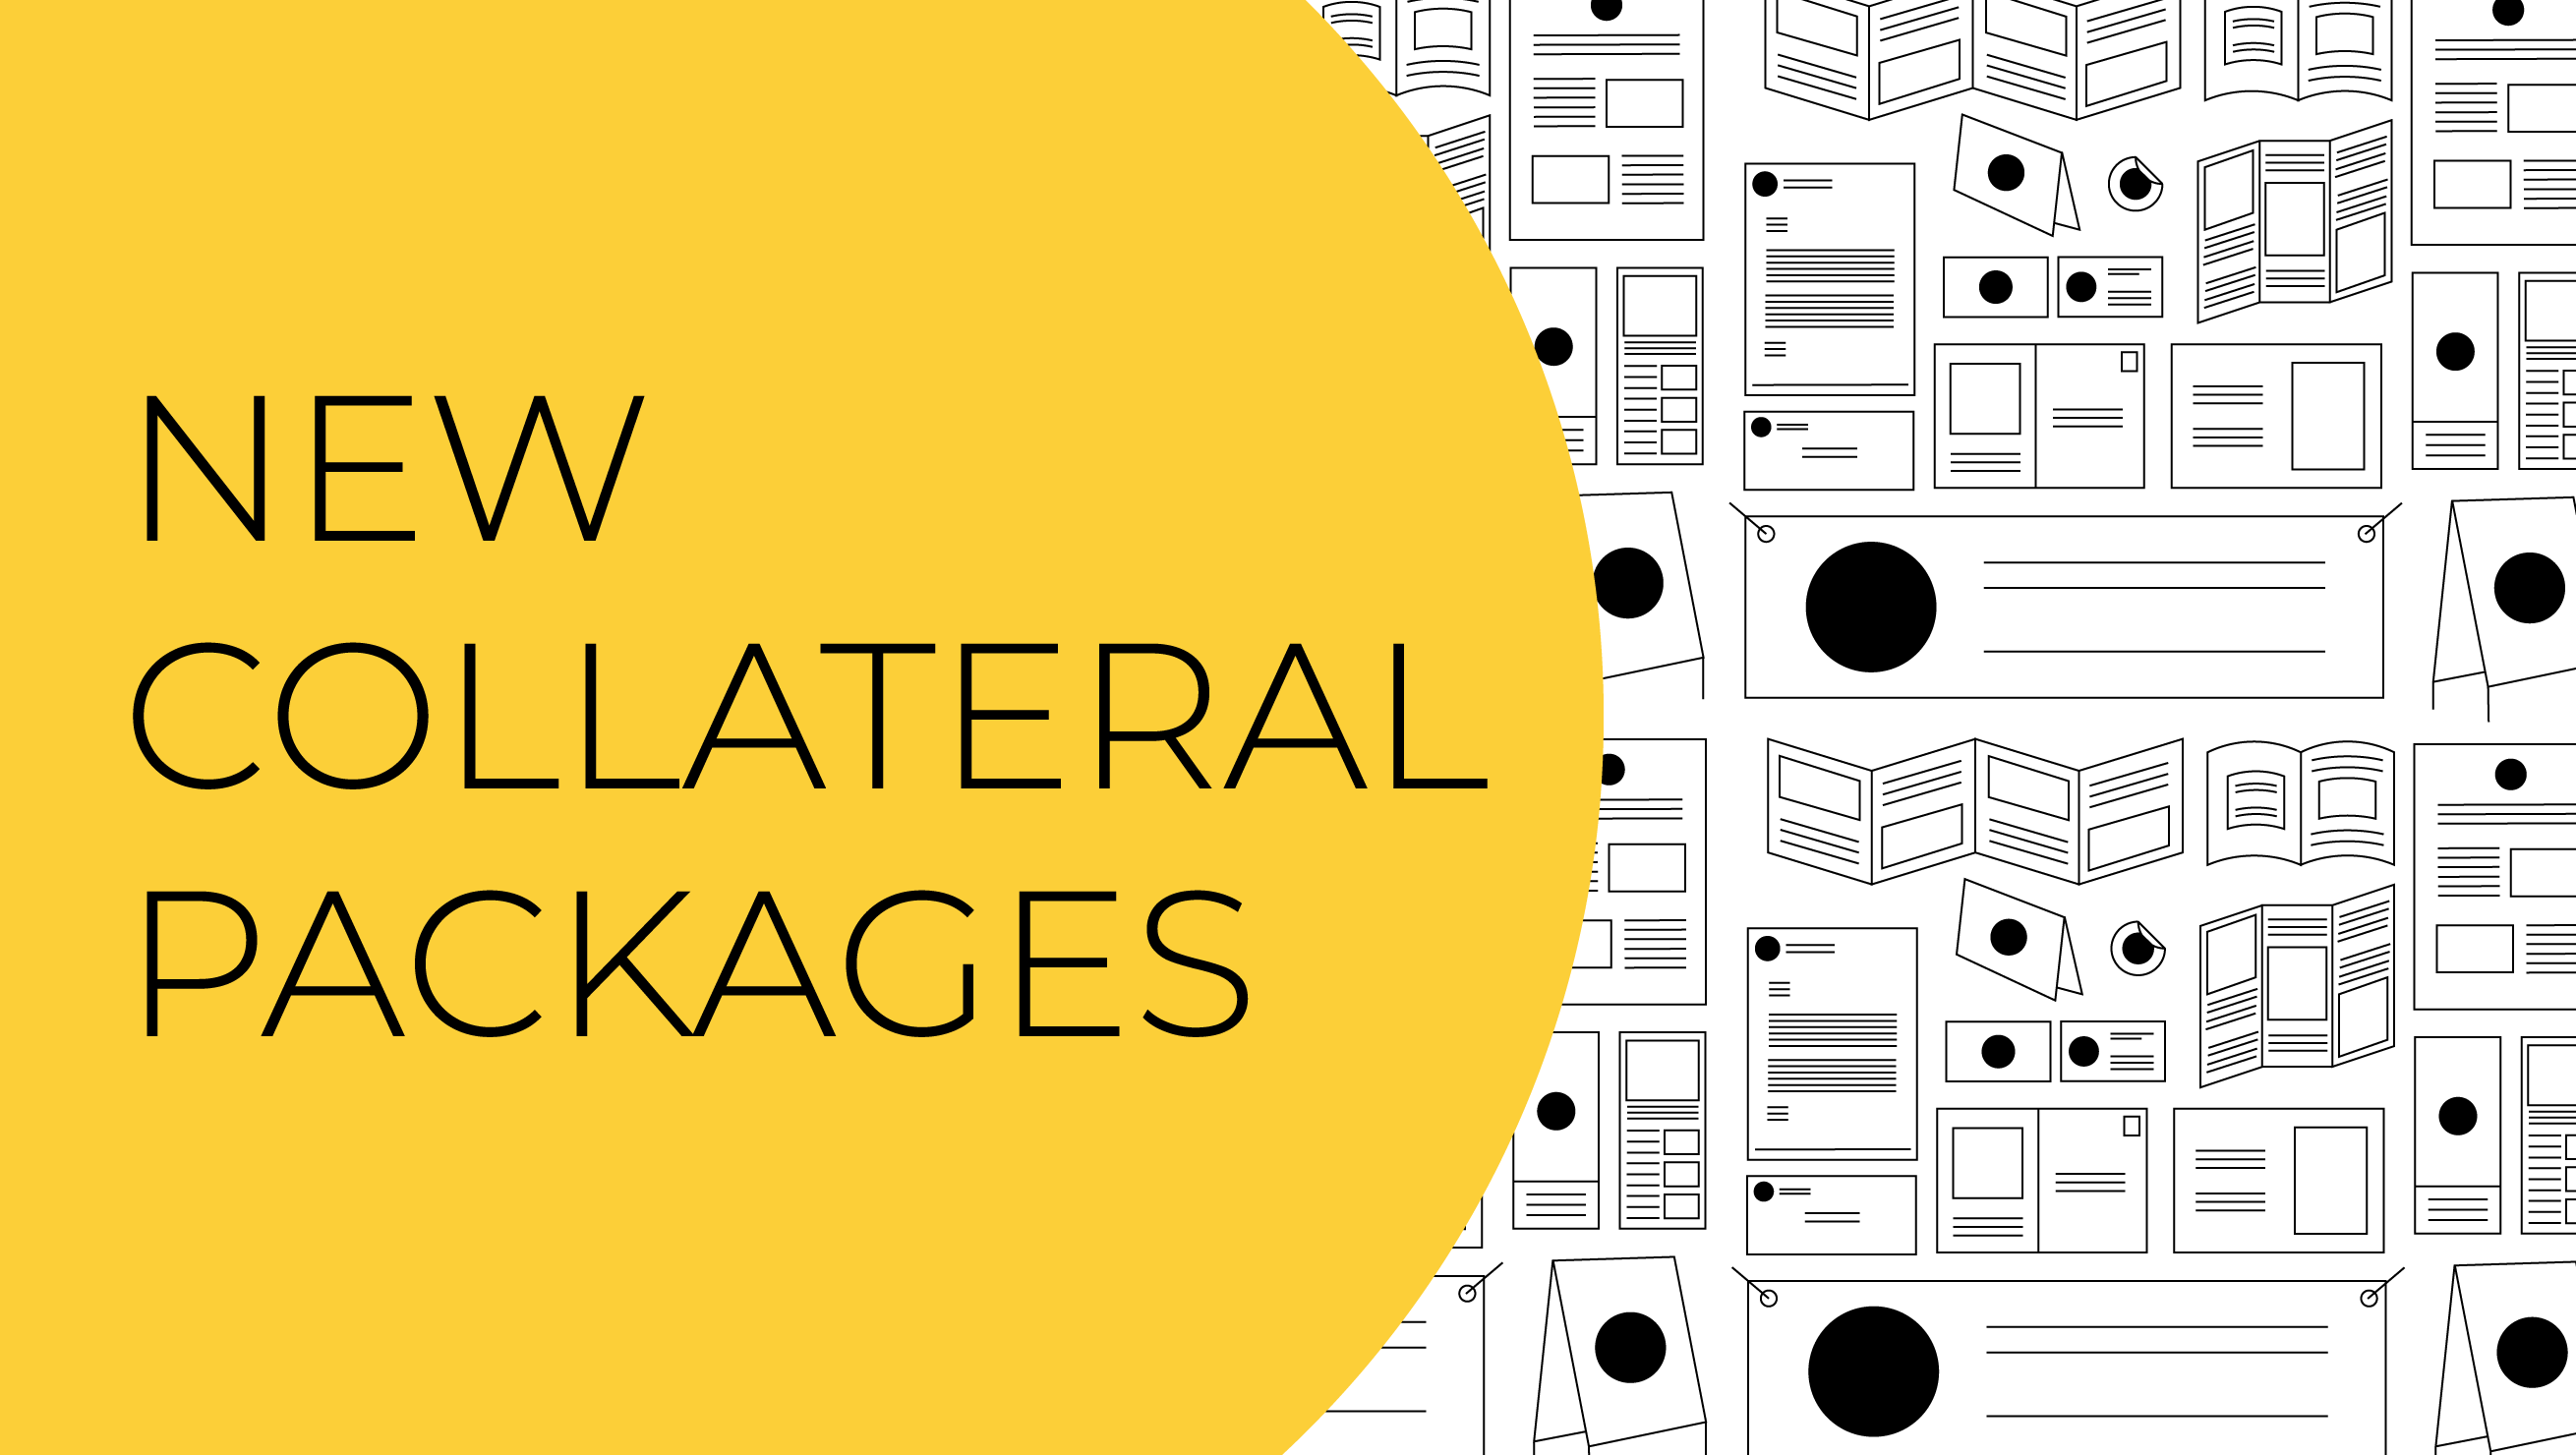 New Collateral Packages by GTMA.